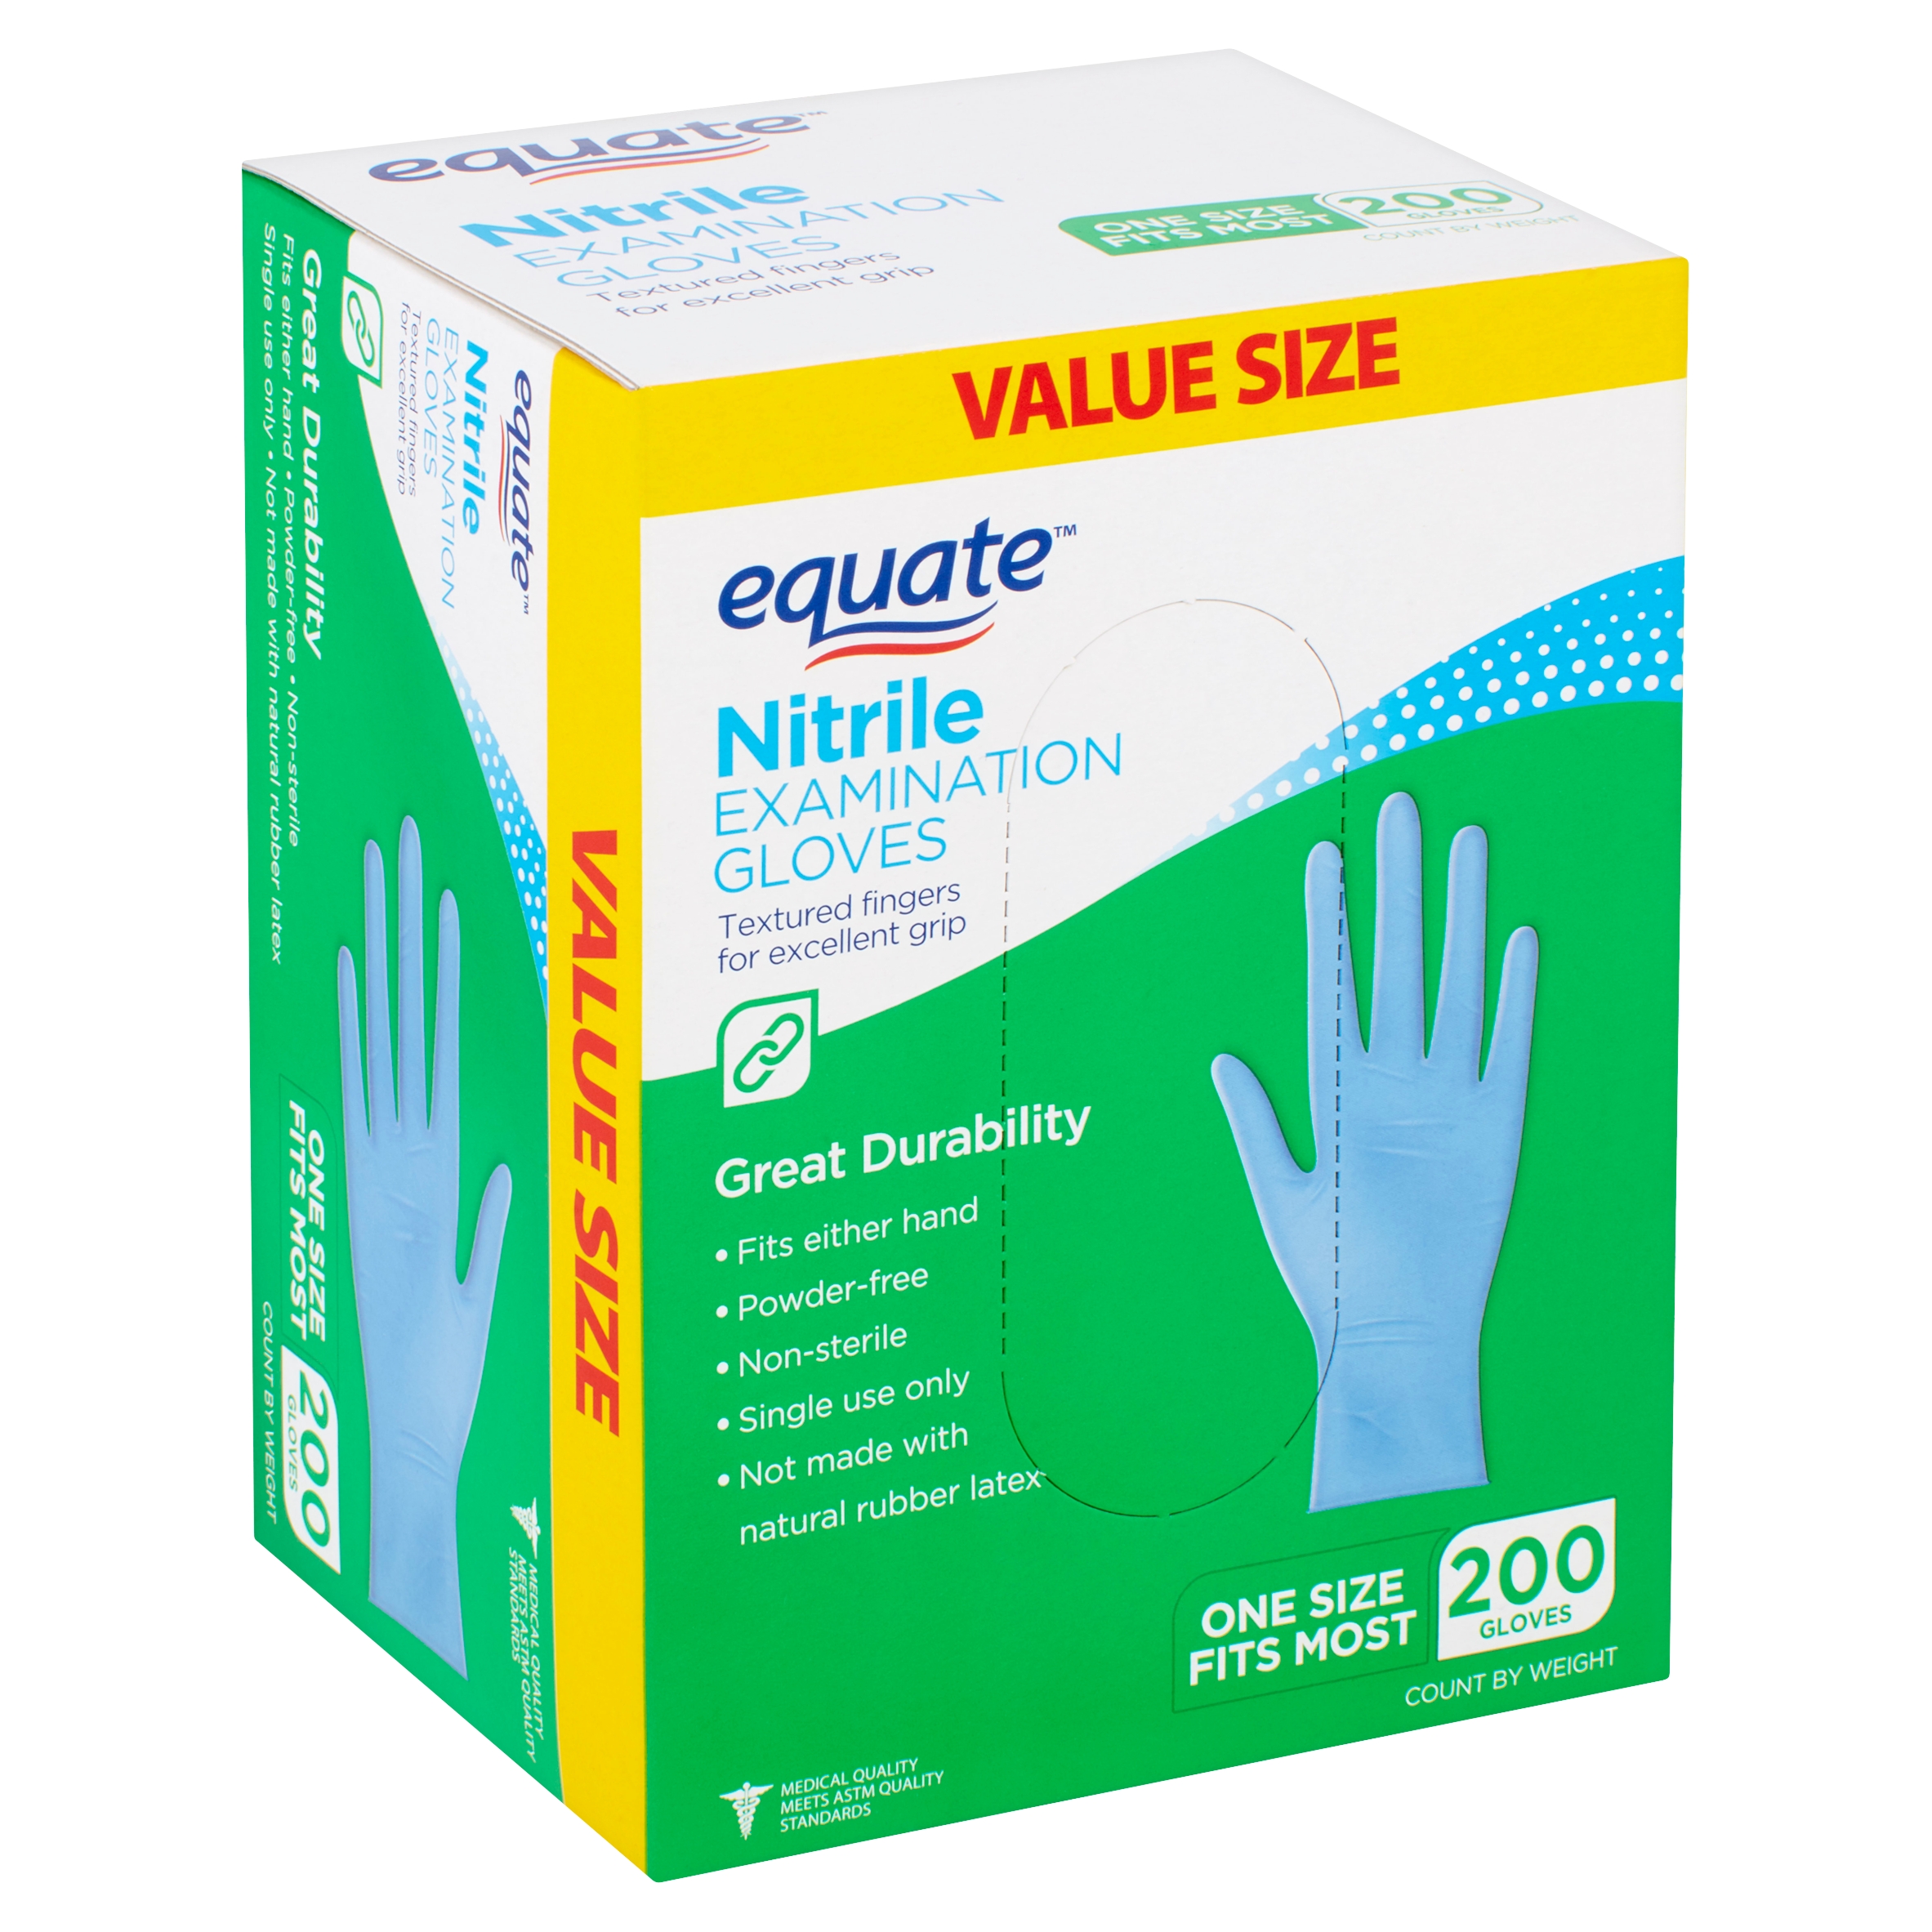 Equate Nitrile Examination Gloves Value Size, 200 count - image 1 of 10